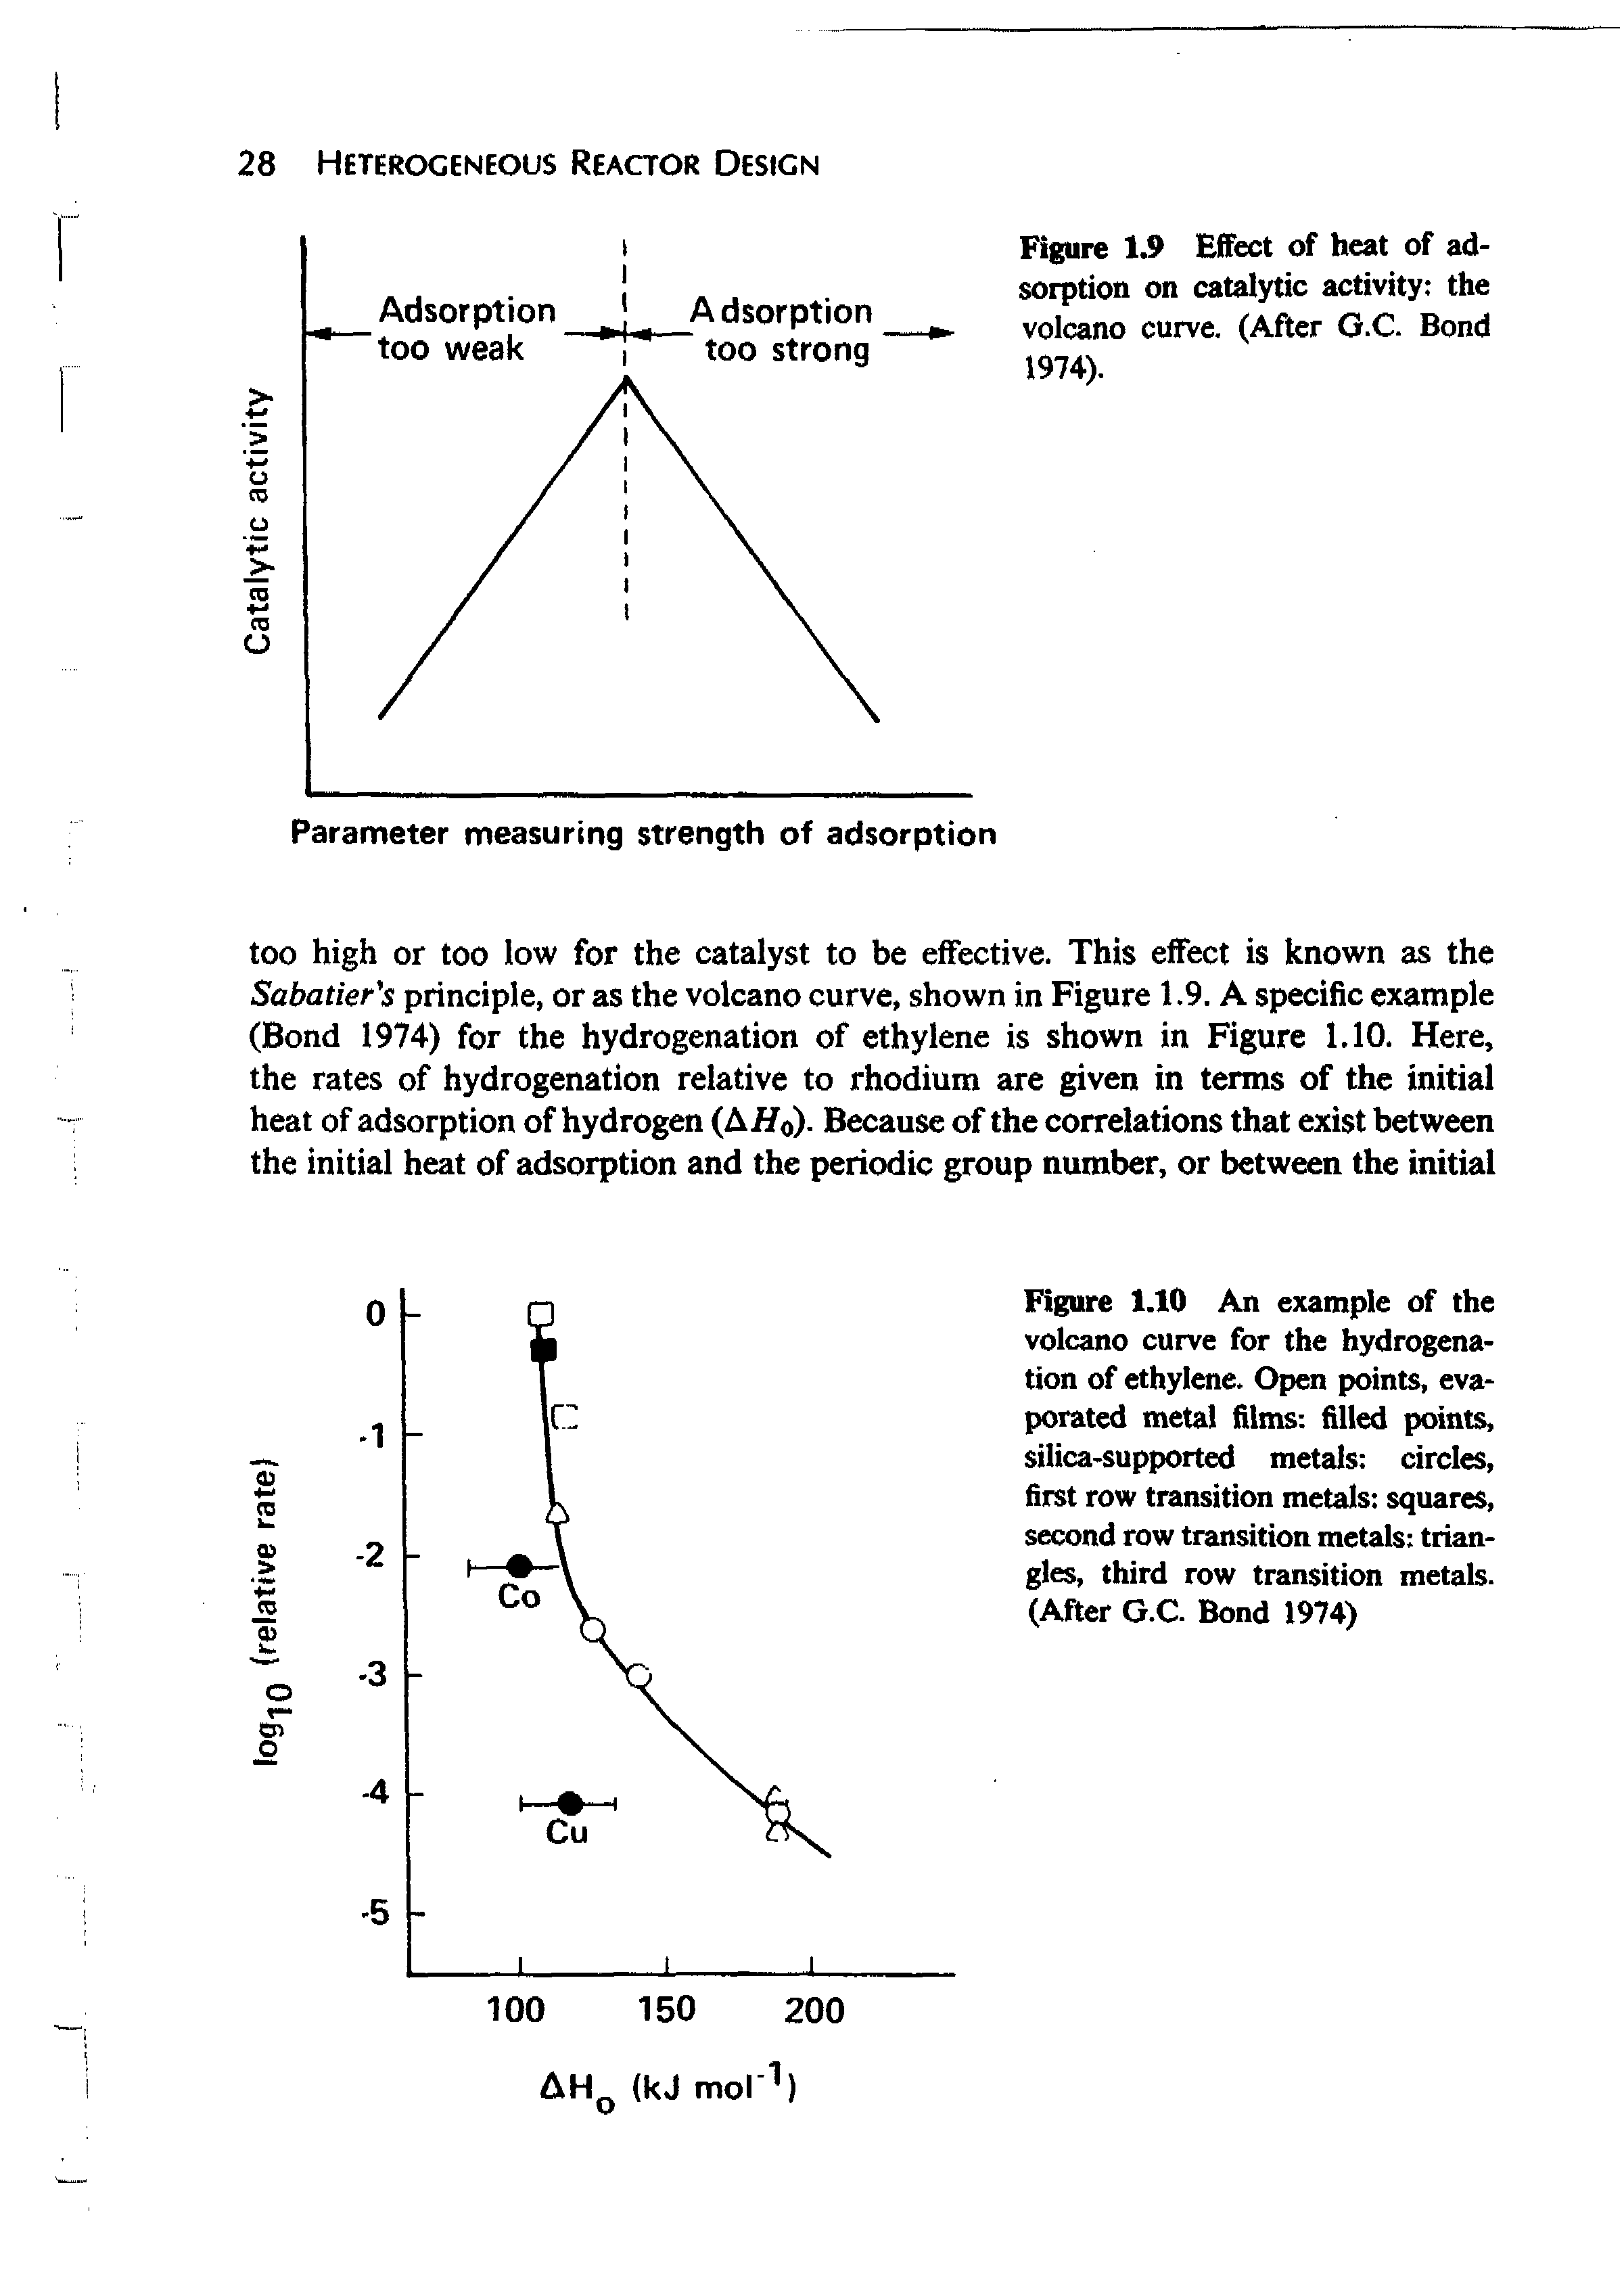 Figure 1.10 An example of the volcano curve for the hydrogenation of ethylene. Open points, evaporated metal films filled points, silica-supported metals circles, first row transition metals squares, second row transition metals triangles, third row transition metals. (After G.C Bond 1974)...